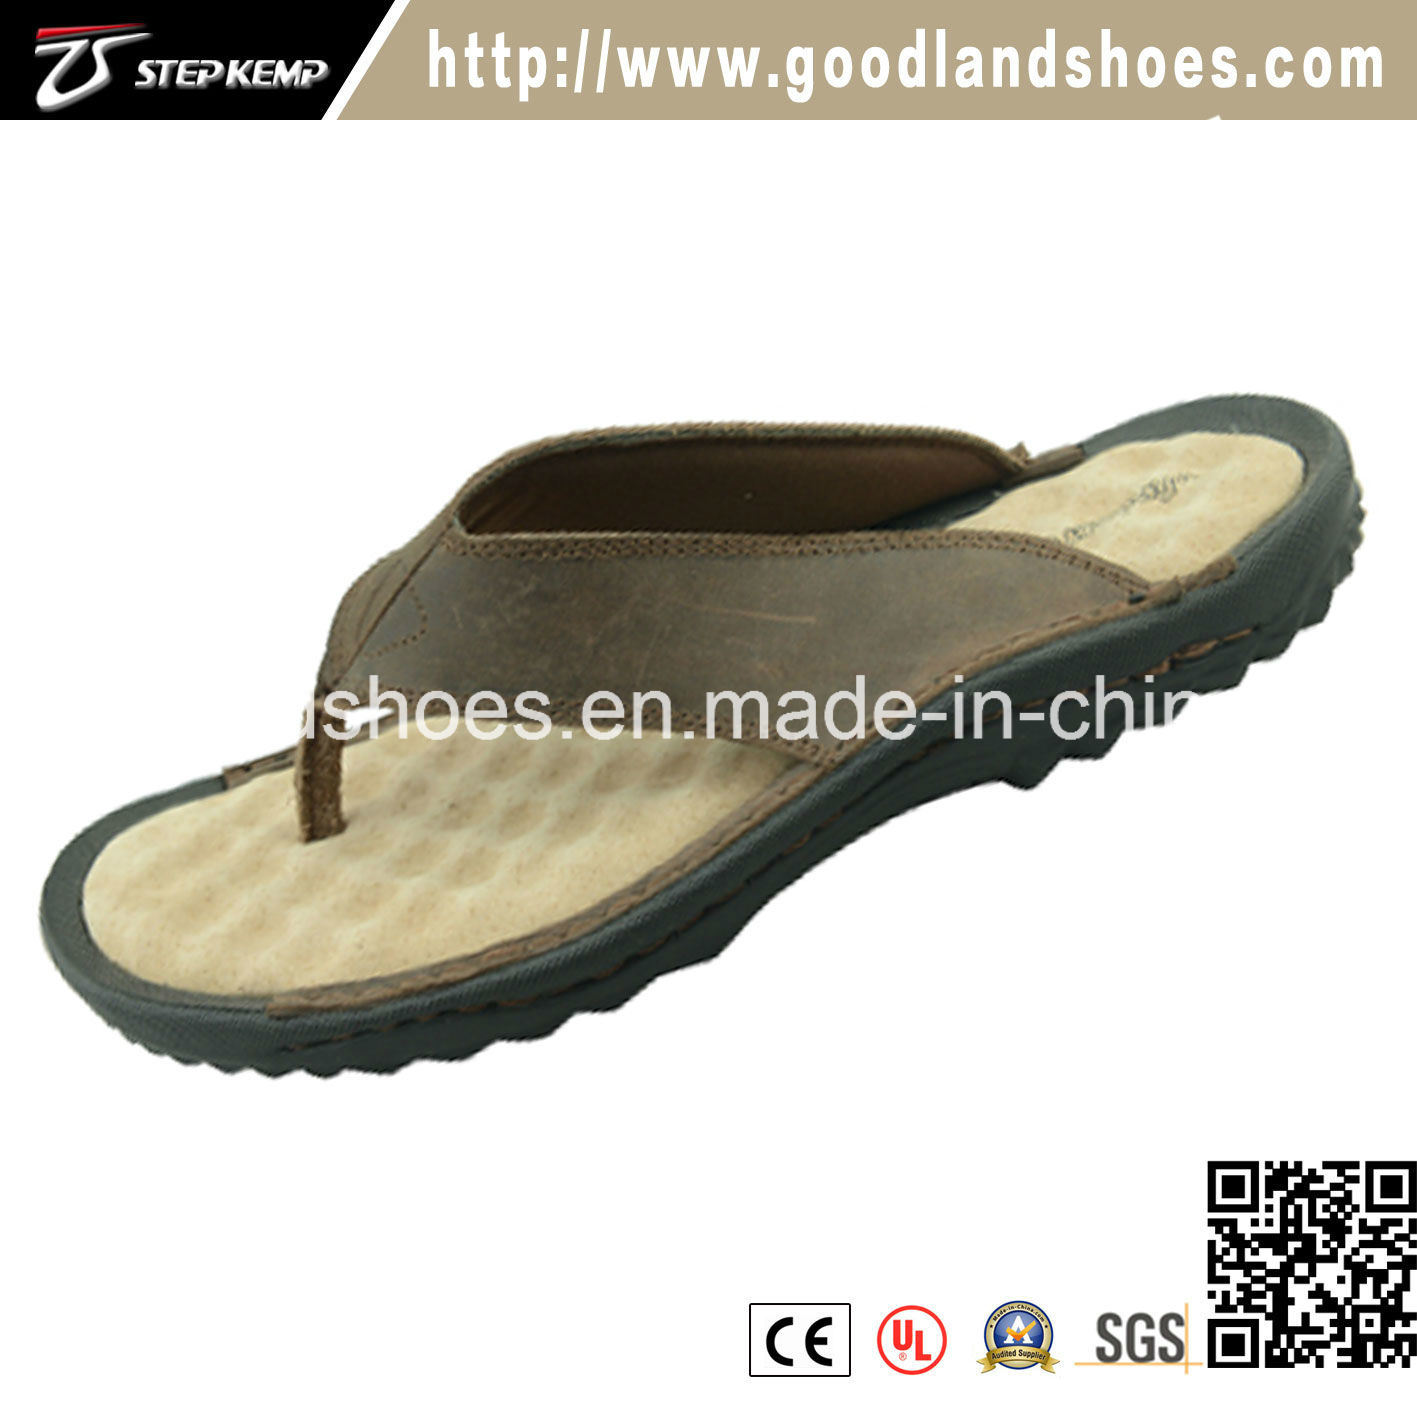 New Summer Casual Beach Slippers Resistant Anti-Skid Shoes 20047